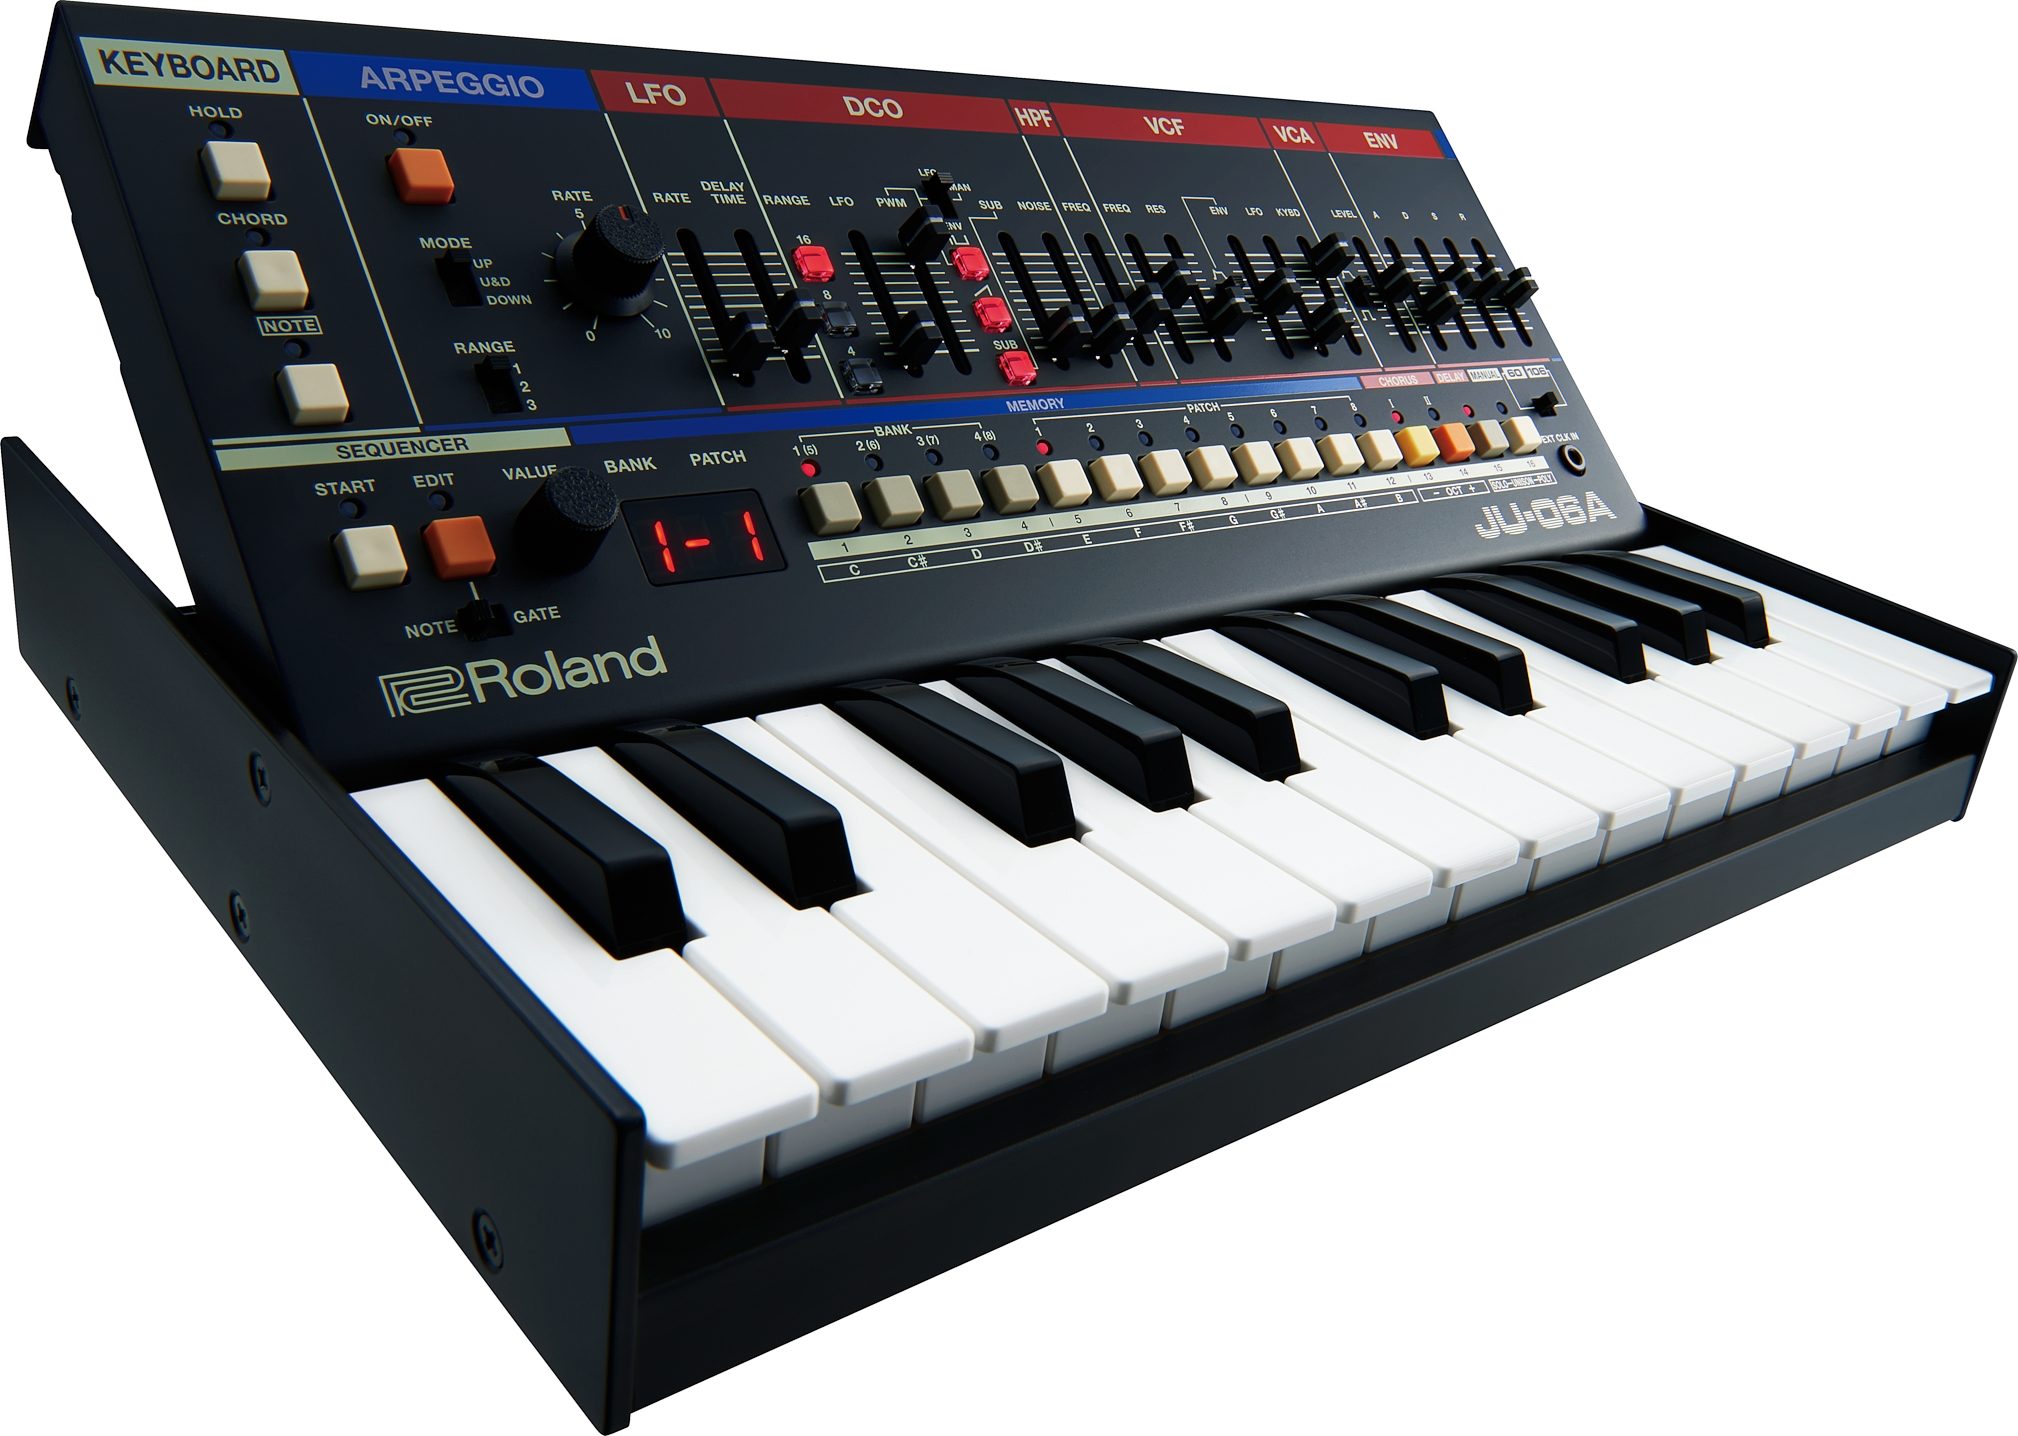 Roland JU-06A Boutique Series Synthesizer